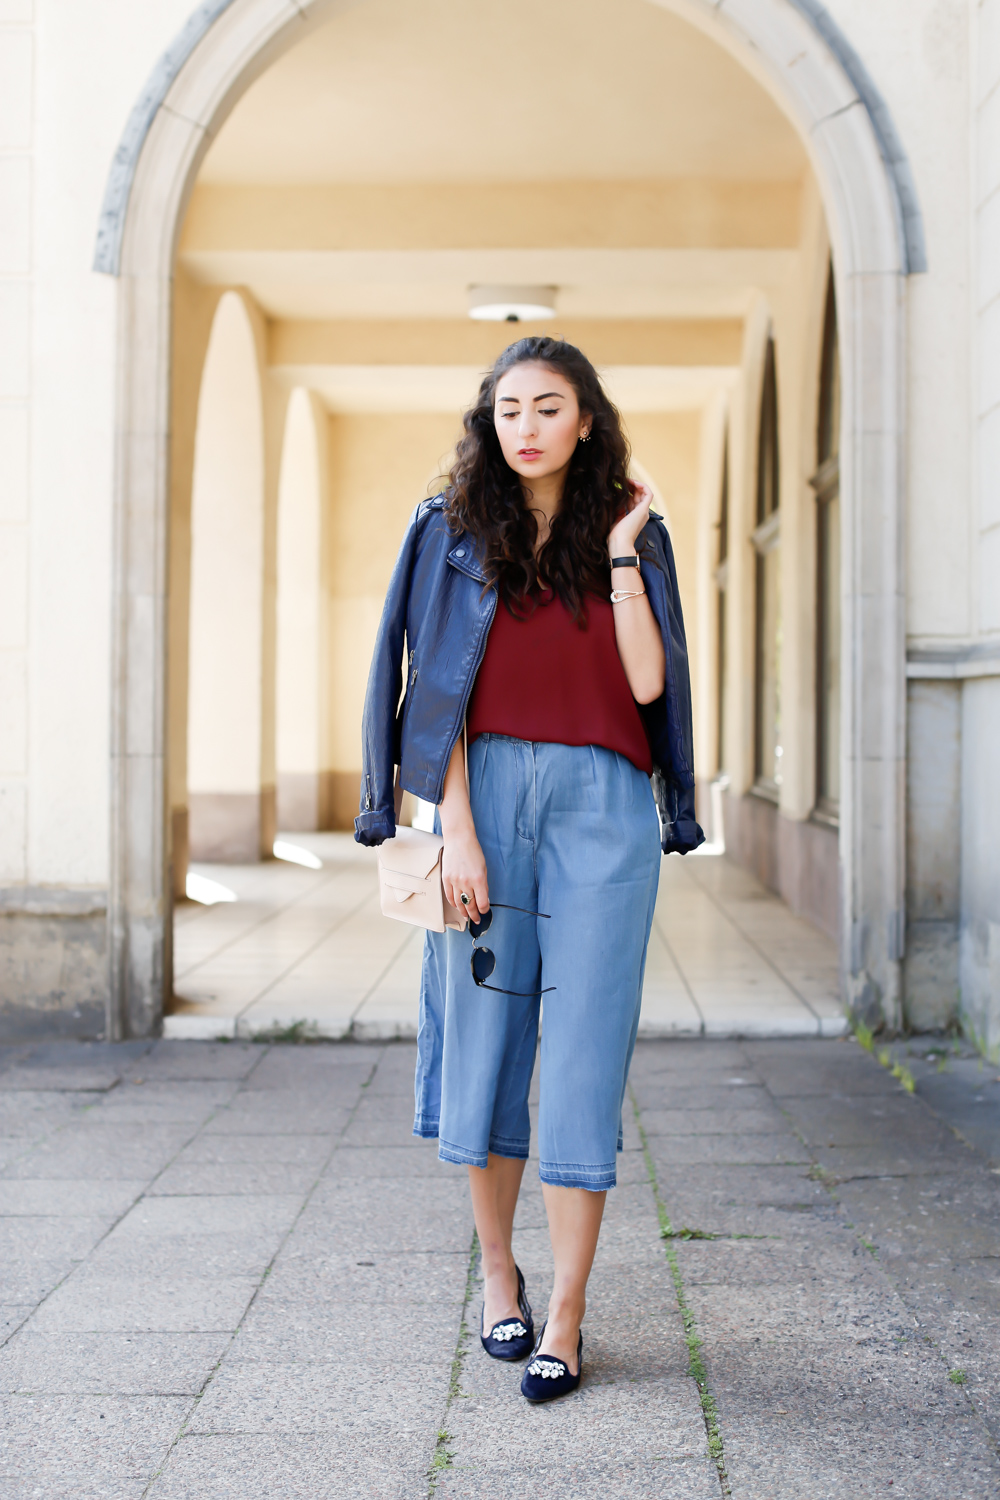 Mango Denim Culottes Butterfly Twist pointed ballerinas ballet shoes Strappy Top Topshop Leather Jacket Hosenrock Jeans Summer Style Spring Berlin Streetstyle Samieze